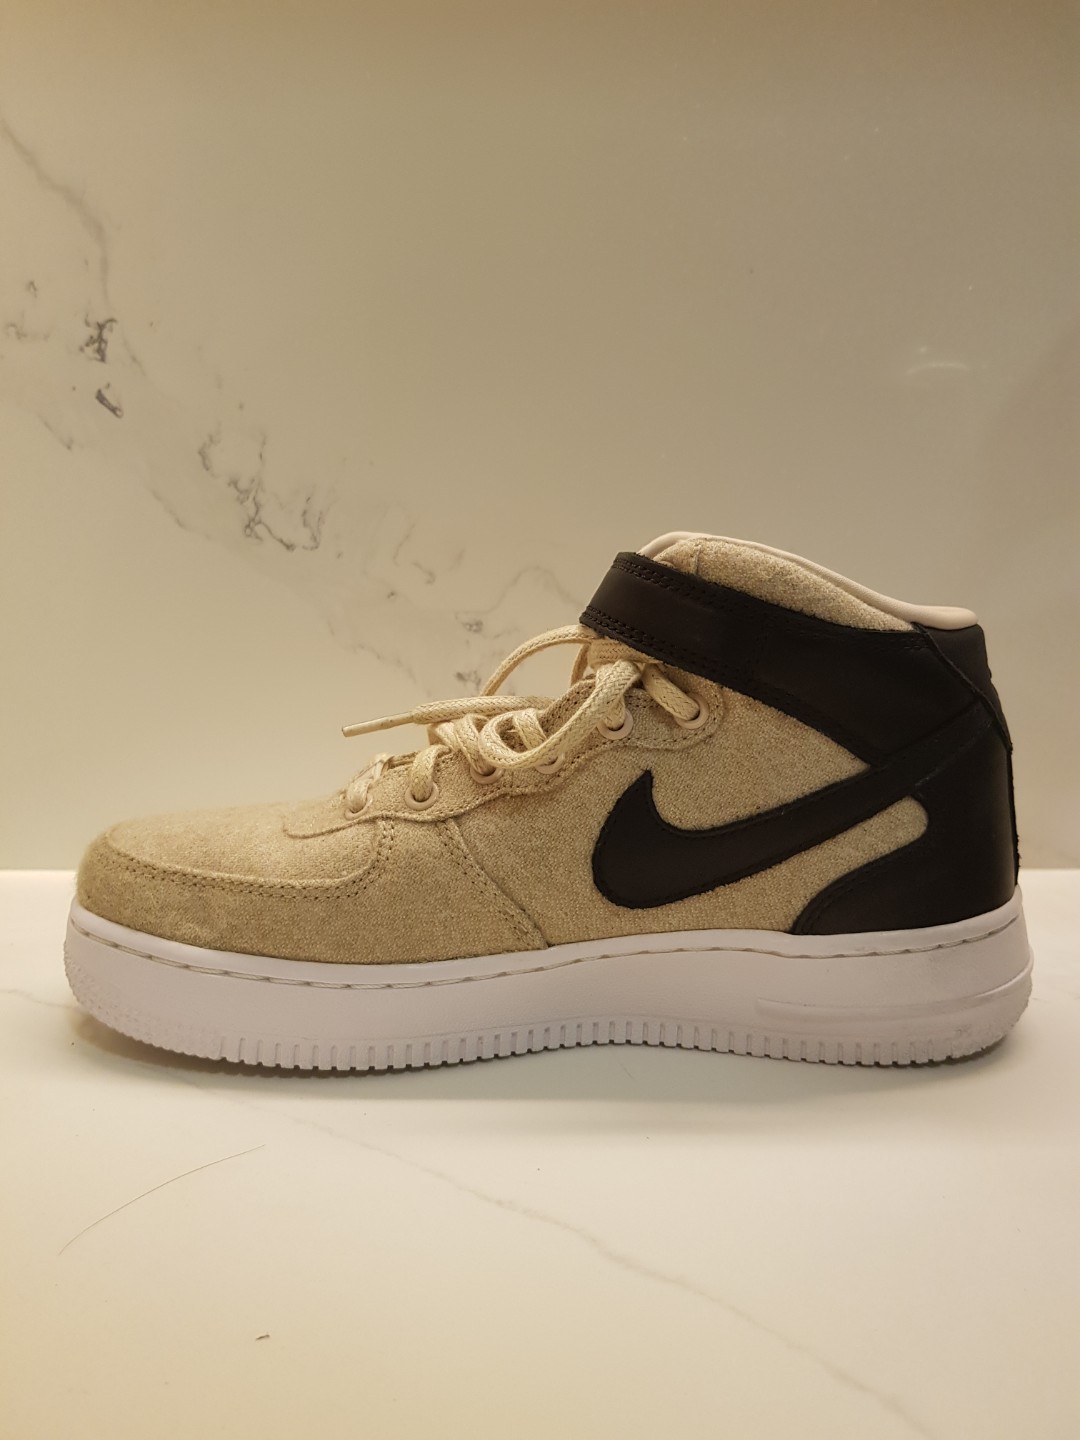 nike wmns air force 1 07 mid leather premium oatmeal